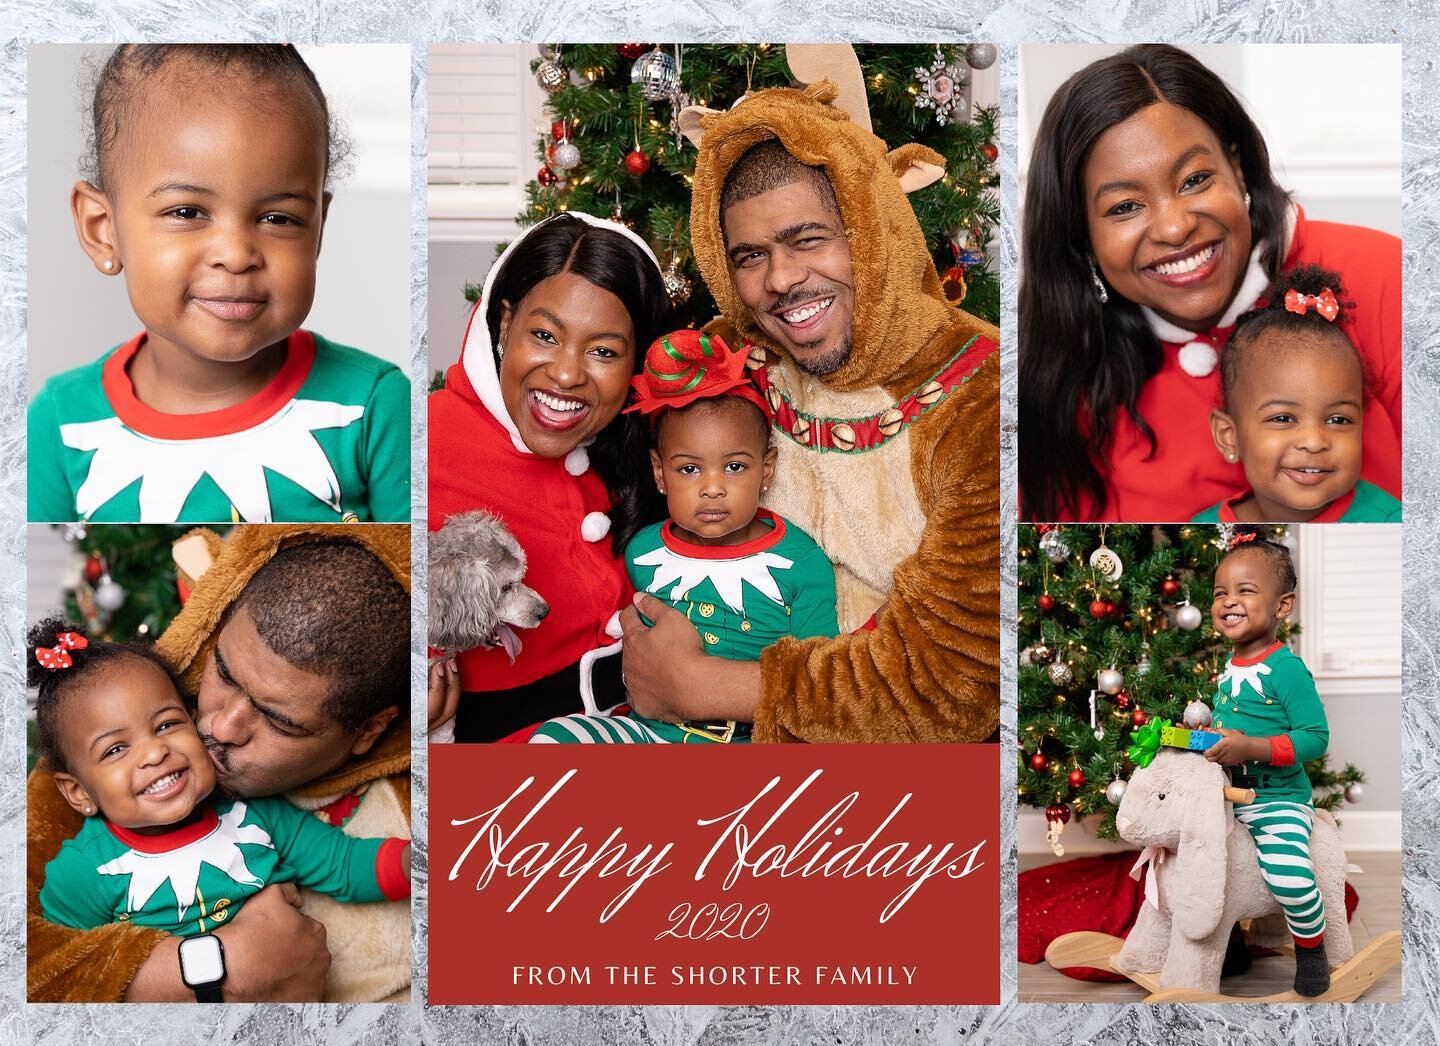 Merry Christmas from my family to yours! 🎄🎅🏾
-
This year has taught us that regardless of how much stuff we have... under the tree, in the fridge, or in our personal arsenal of baggage and insecurities, the best gift of all is love. Love is genuin